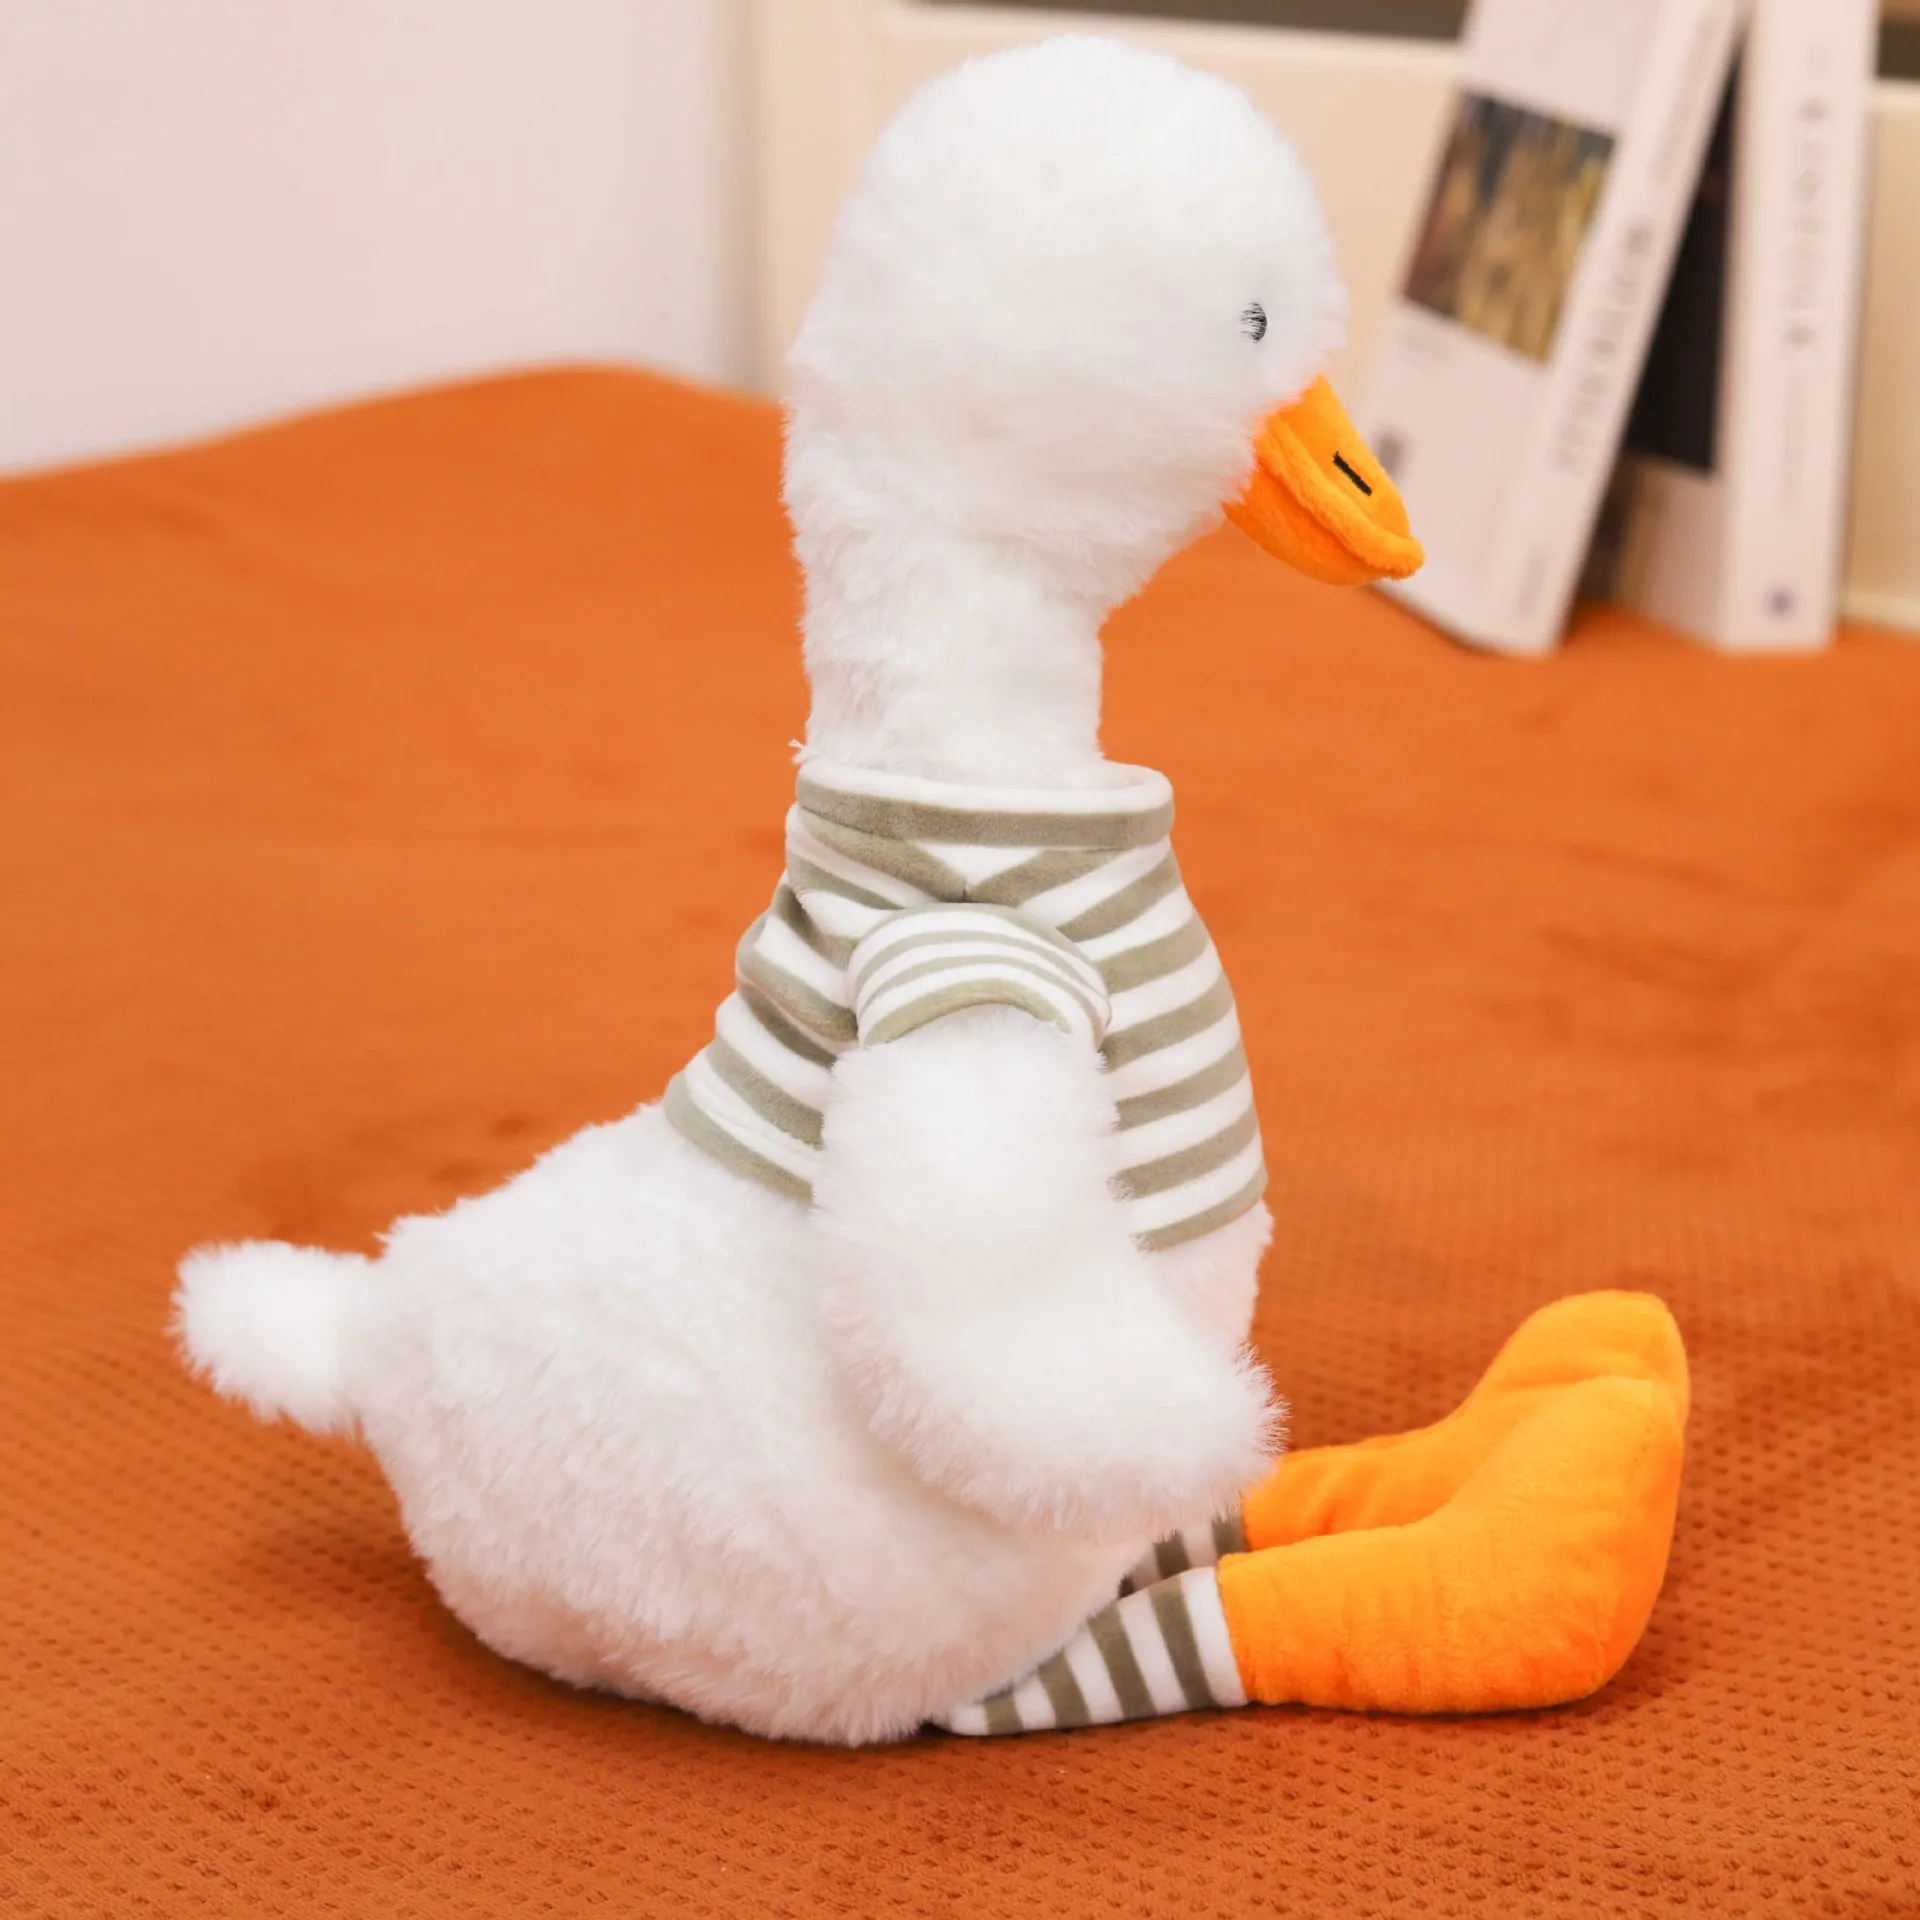 Cute Cotton Goose White Swan Duck Stuffed Animal Toys Baby Accompanying Dolls Plush Comfort Soft Pillow Home Decor Bedtime Toys